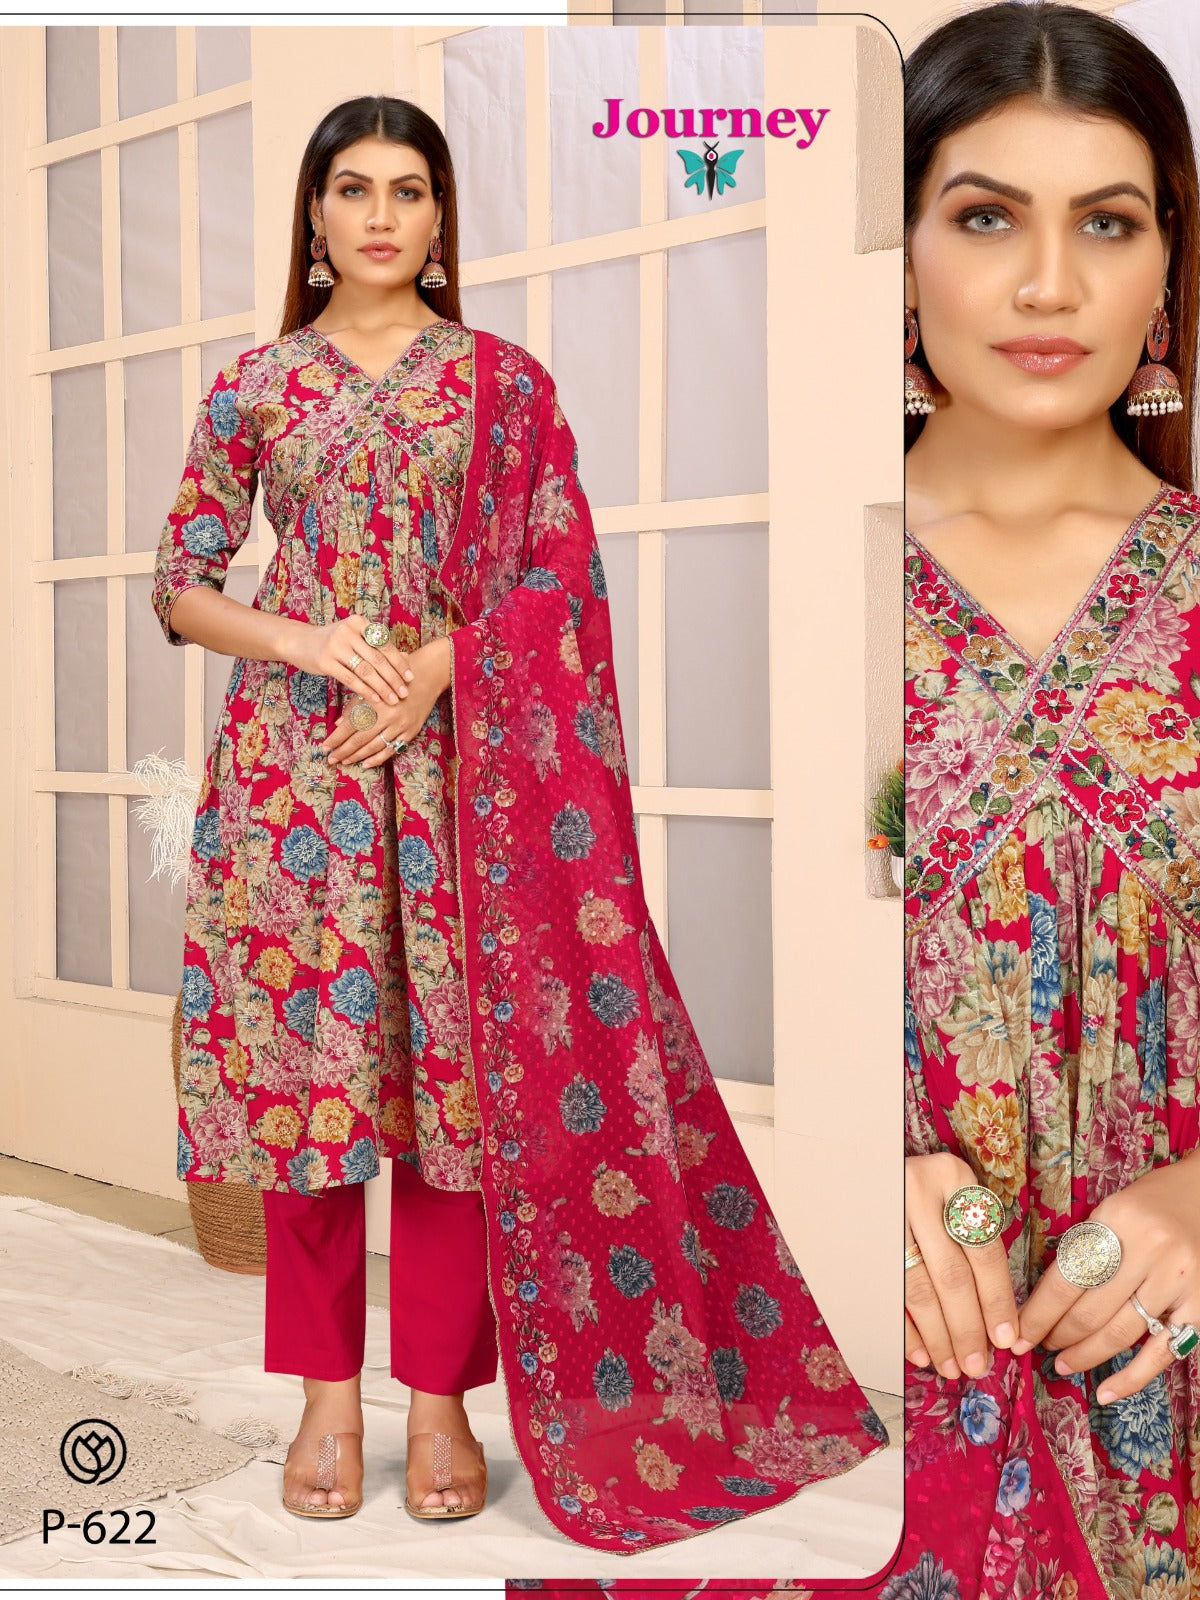 P-622-623 Journey Design Cambric Readymade Pant Style Suits Manufacturer India